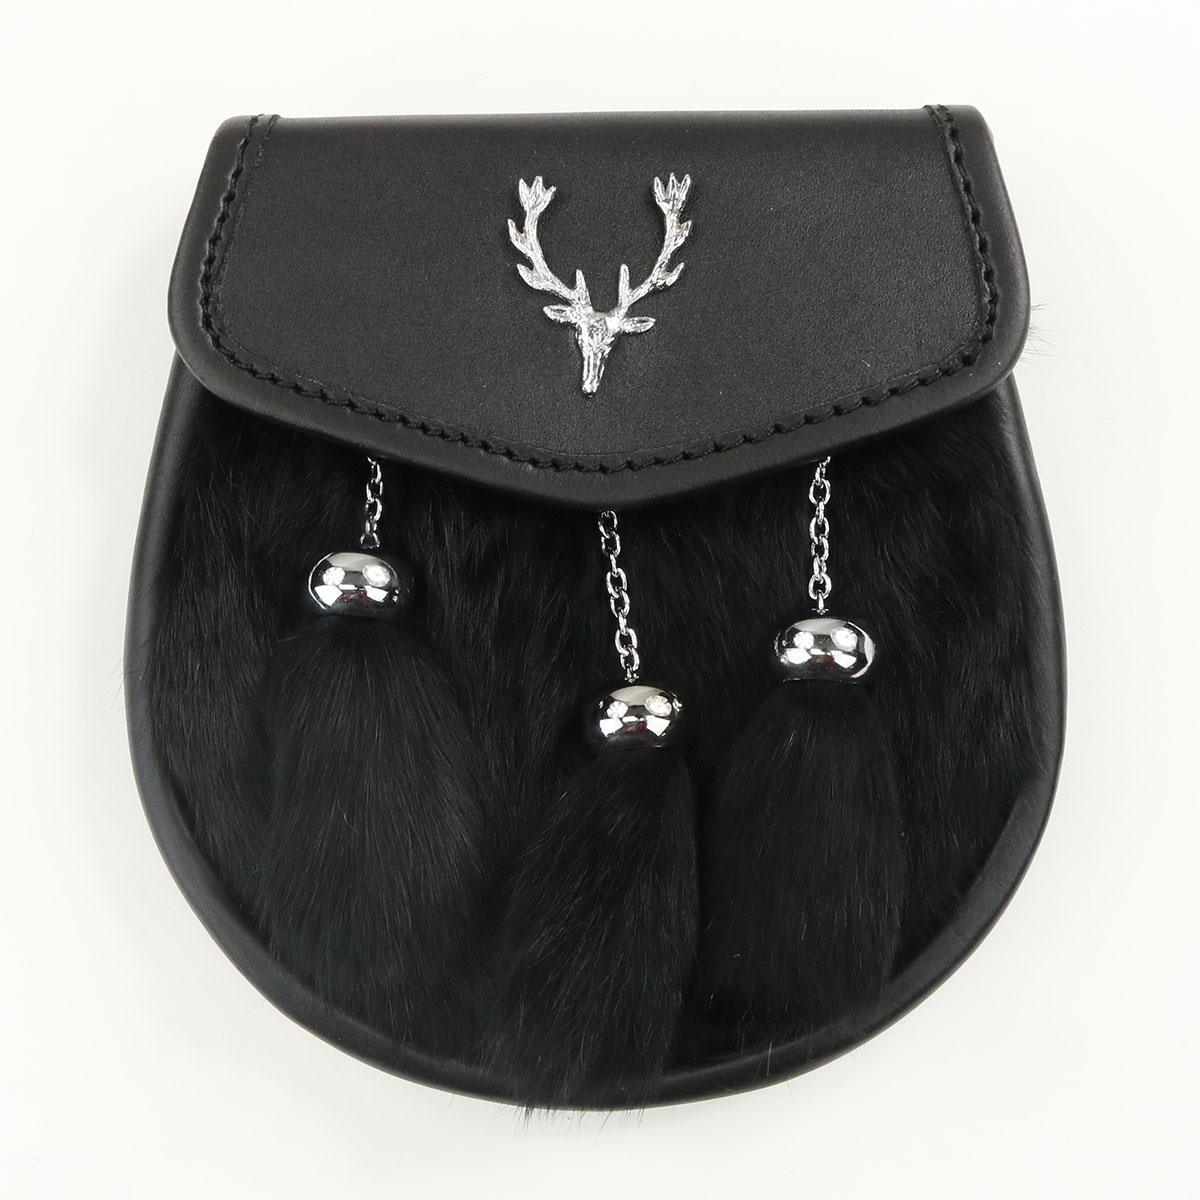 A black Scottish kilt with a Black Rabbit Fur Stag Sporran featuring two deer antlers hanging from it.